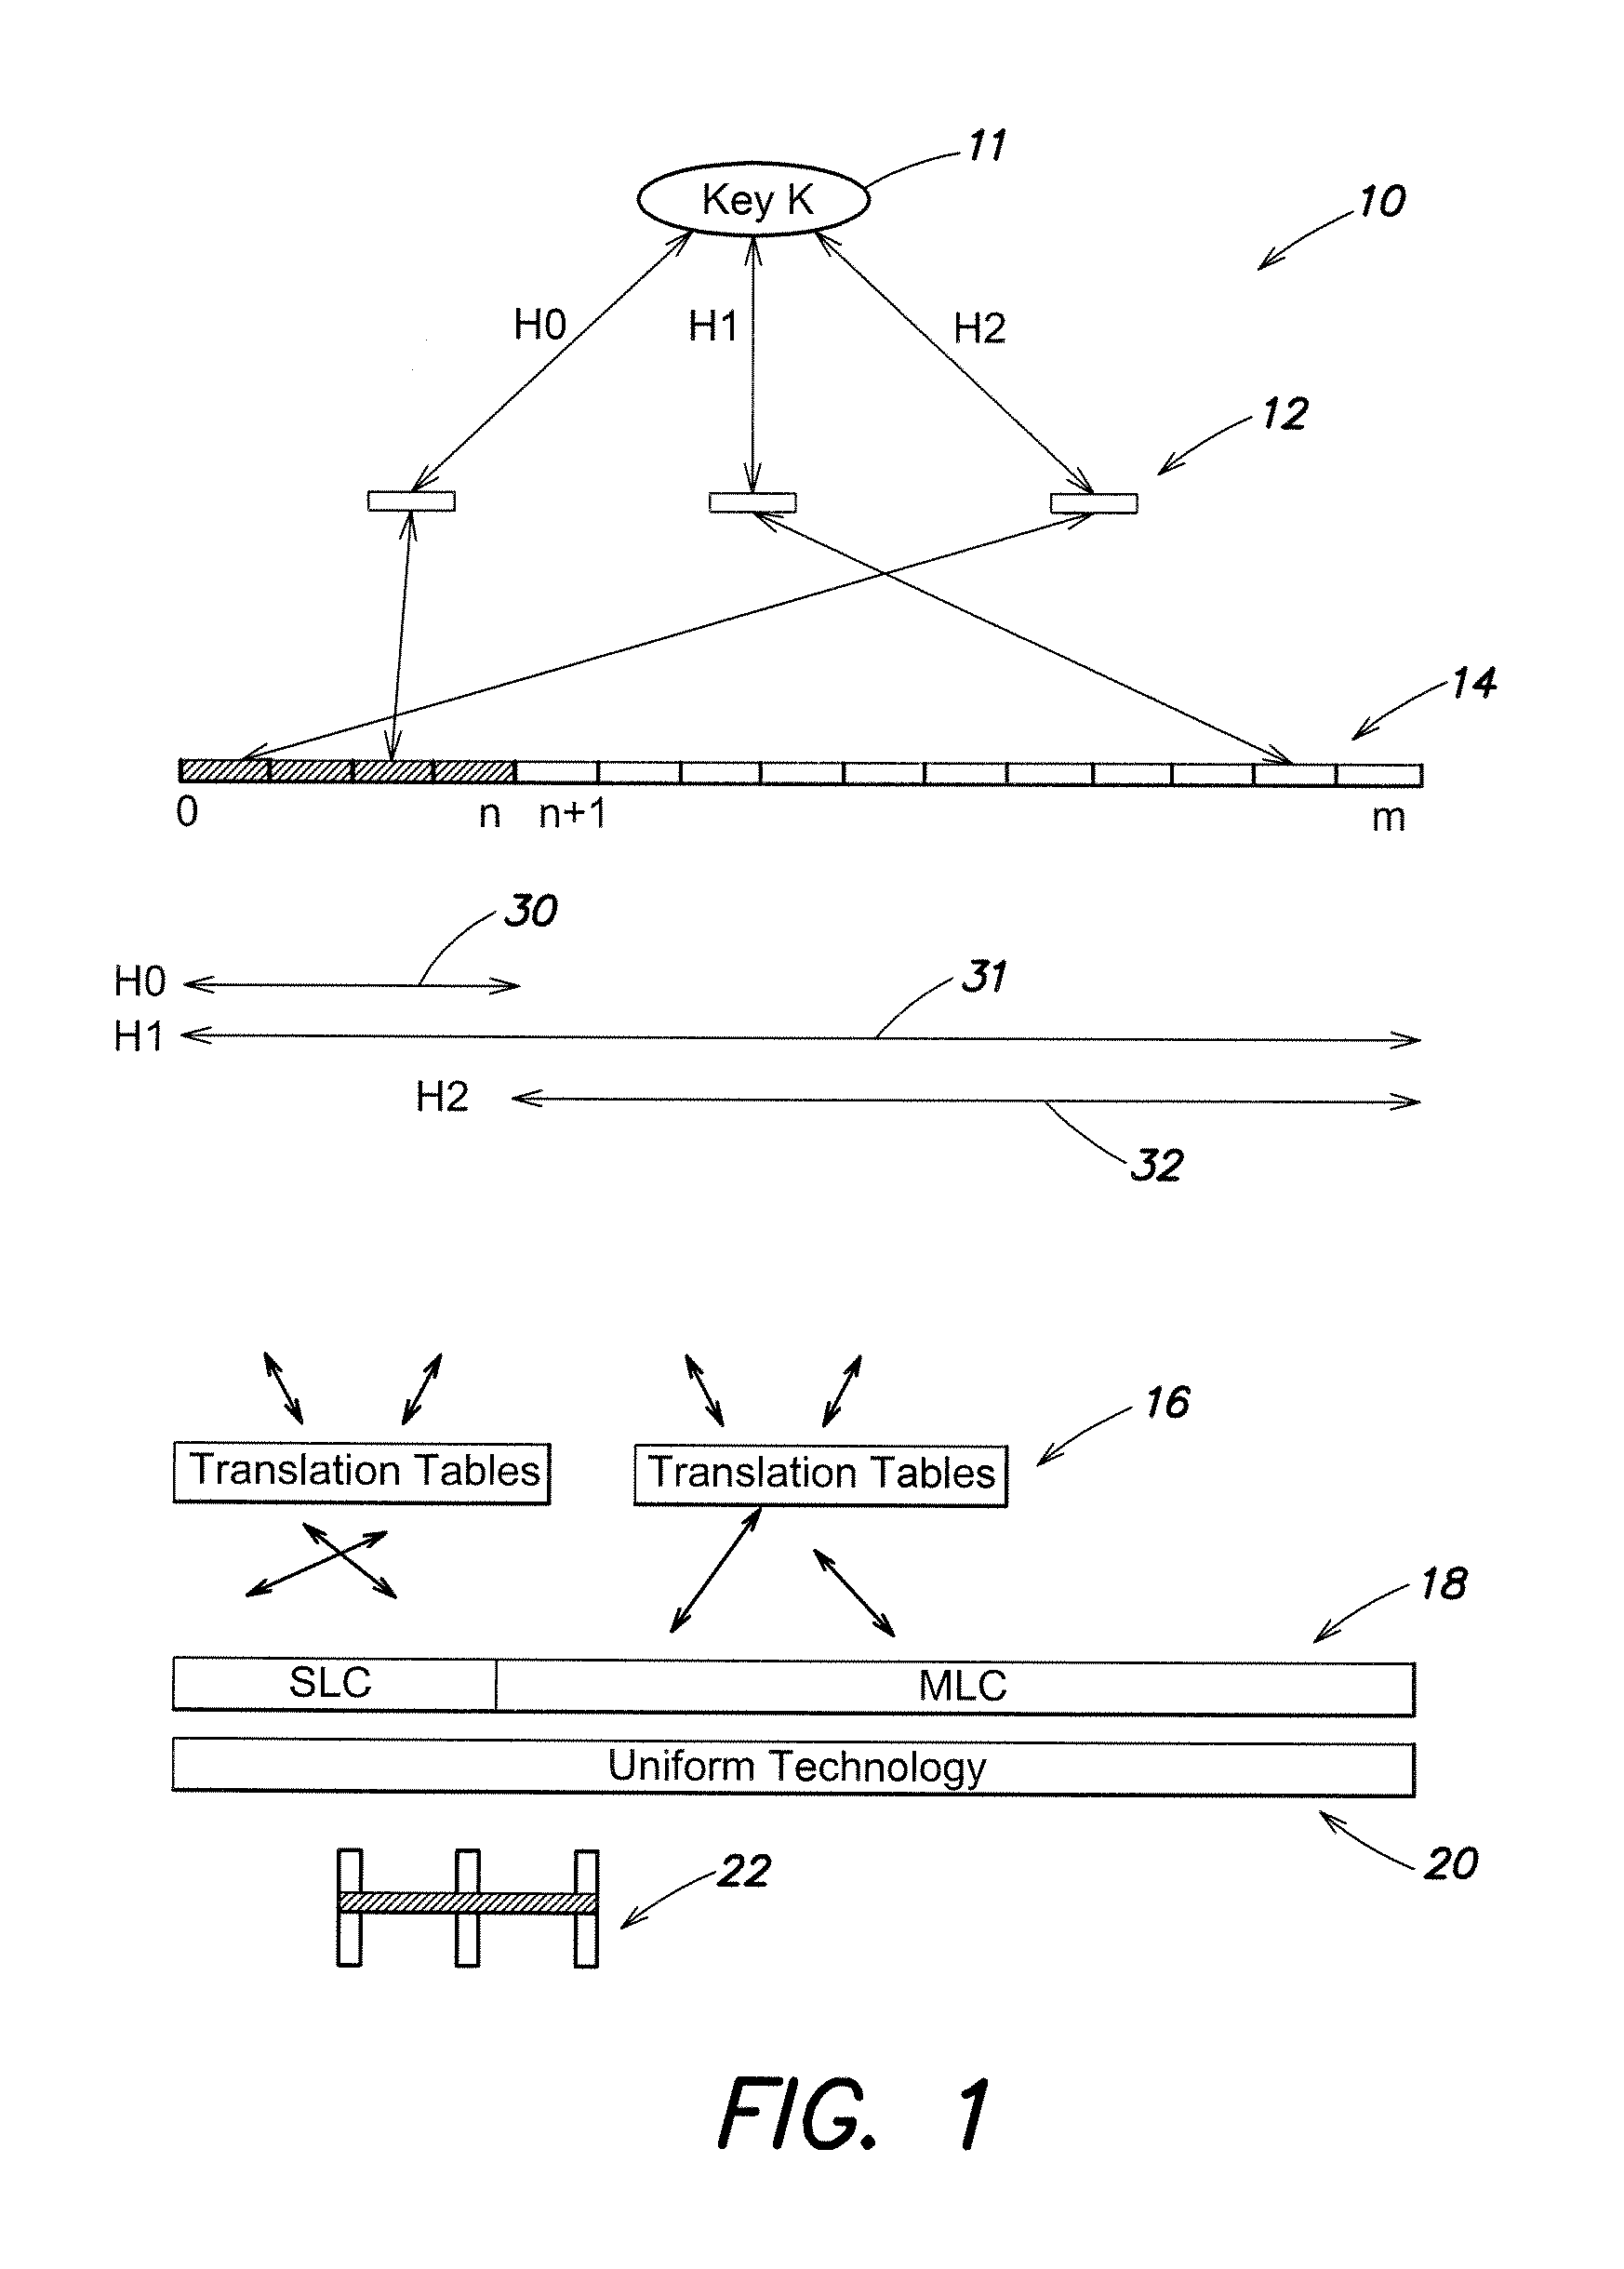 Method and apparatus utilizing non-uniform hash functions for placing records in non-uniform access memory